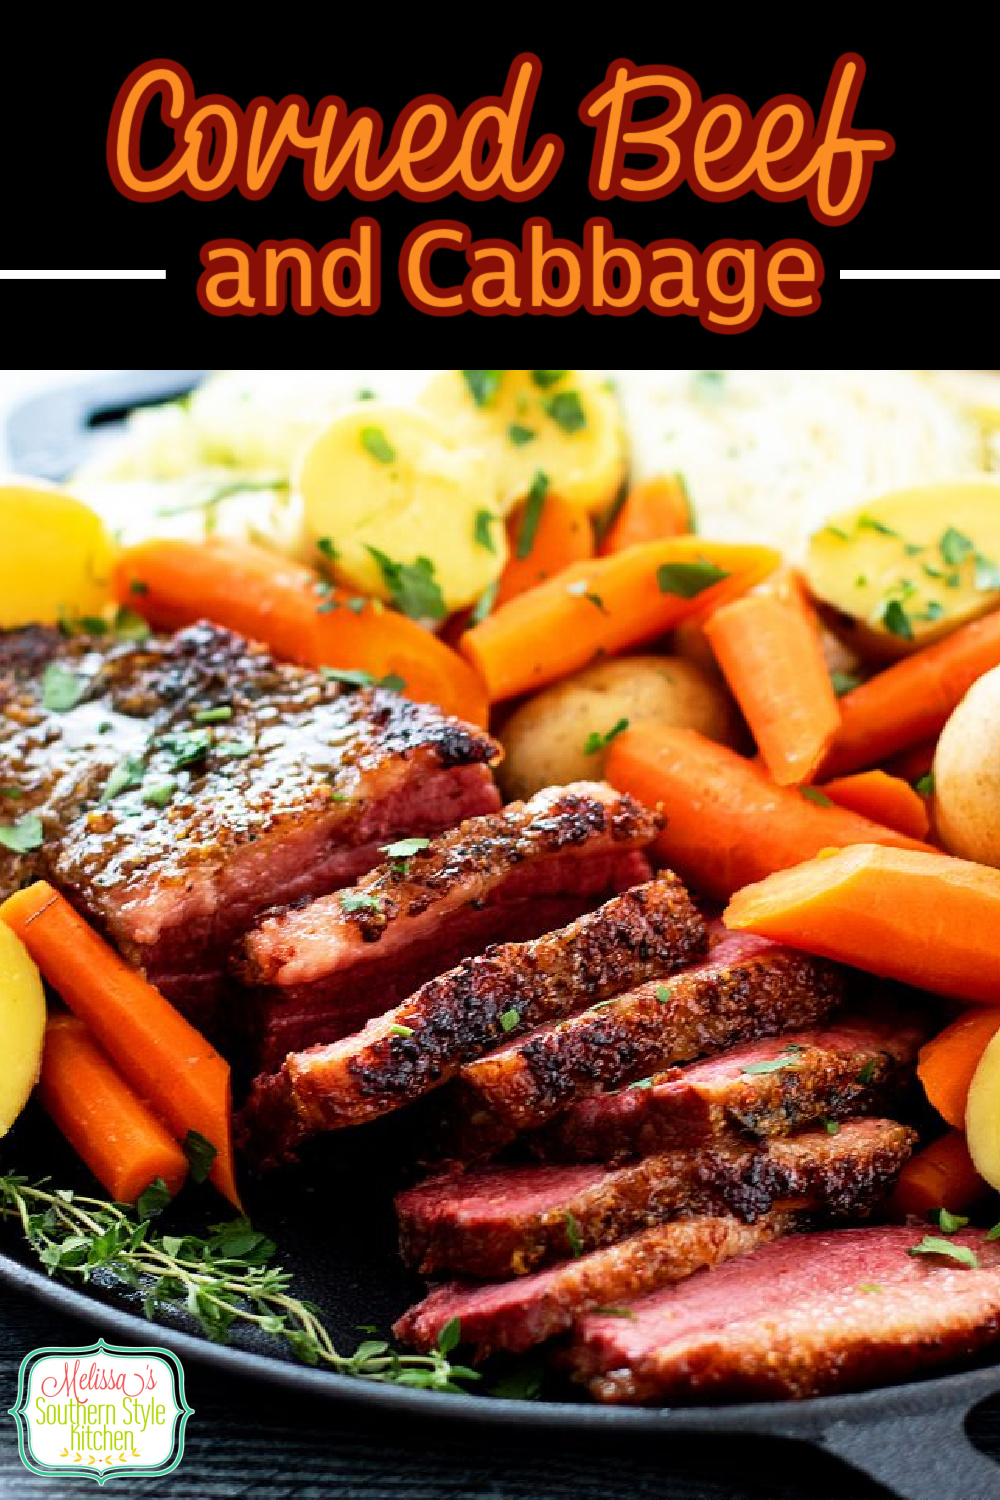 Make this mouthwatering Corned Beef and Cabbage with carrots and potatoes to complete your St Patrick's Day meal #cornedbeef #cornedbeefandcabbage #StPatricksDay #beef #beefbrisket #southernrecipes #cabbage #cornedbeefandcabbage via @melissasssk